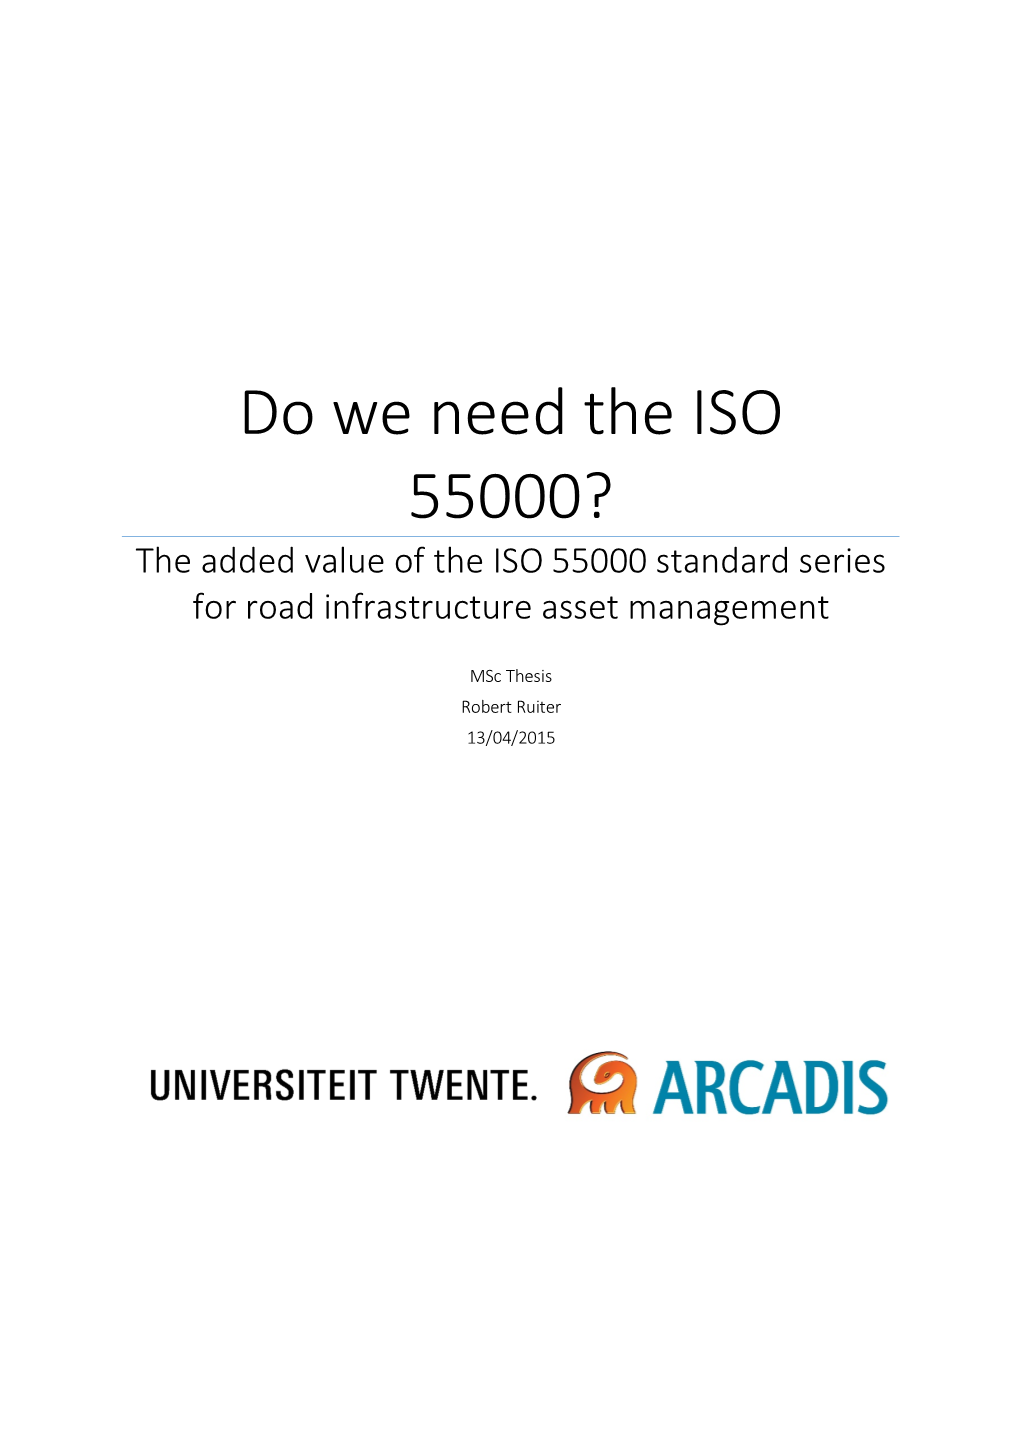 Do We Need the ISO 55000? the Added Value of the ISO 55000 Standard Series for Road Infrastructure Asset Management